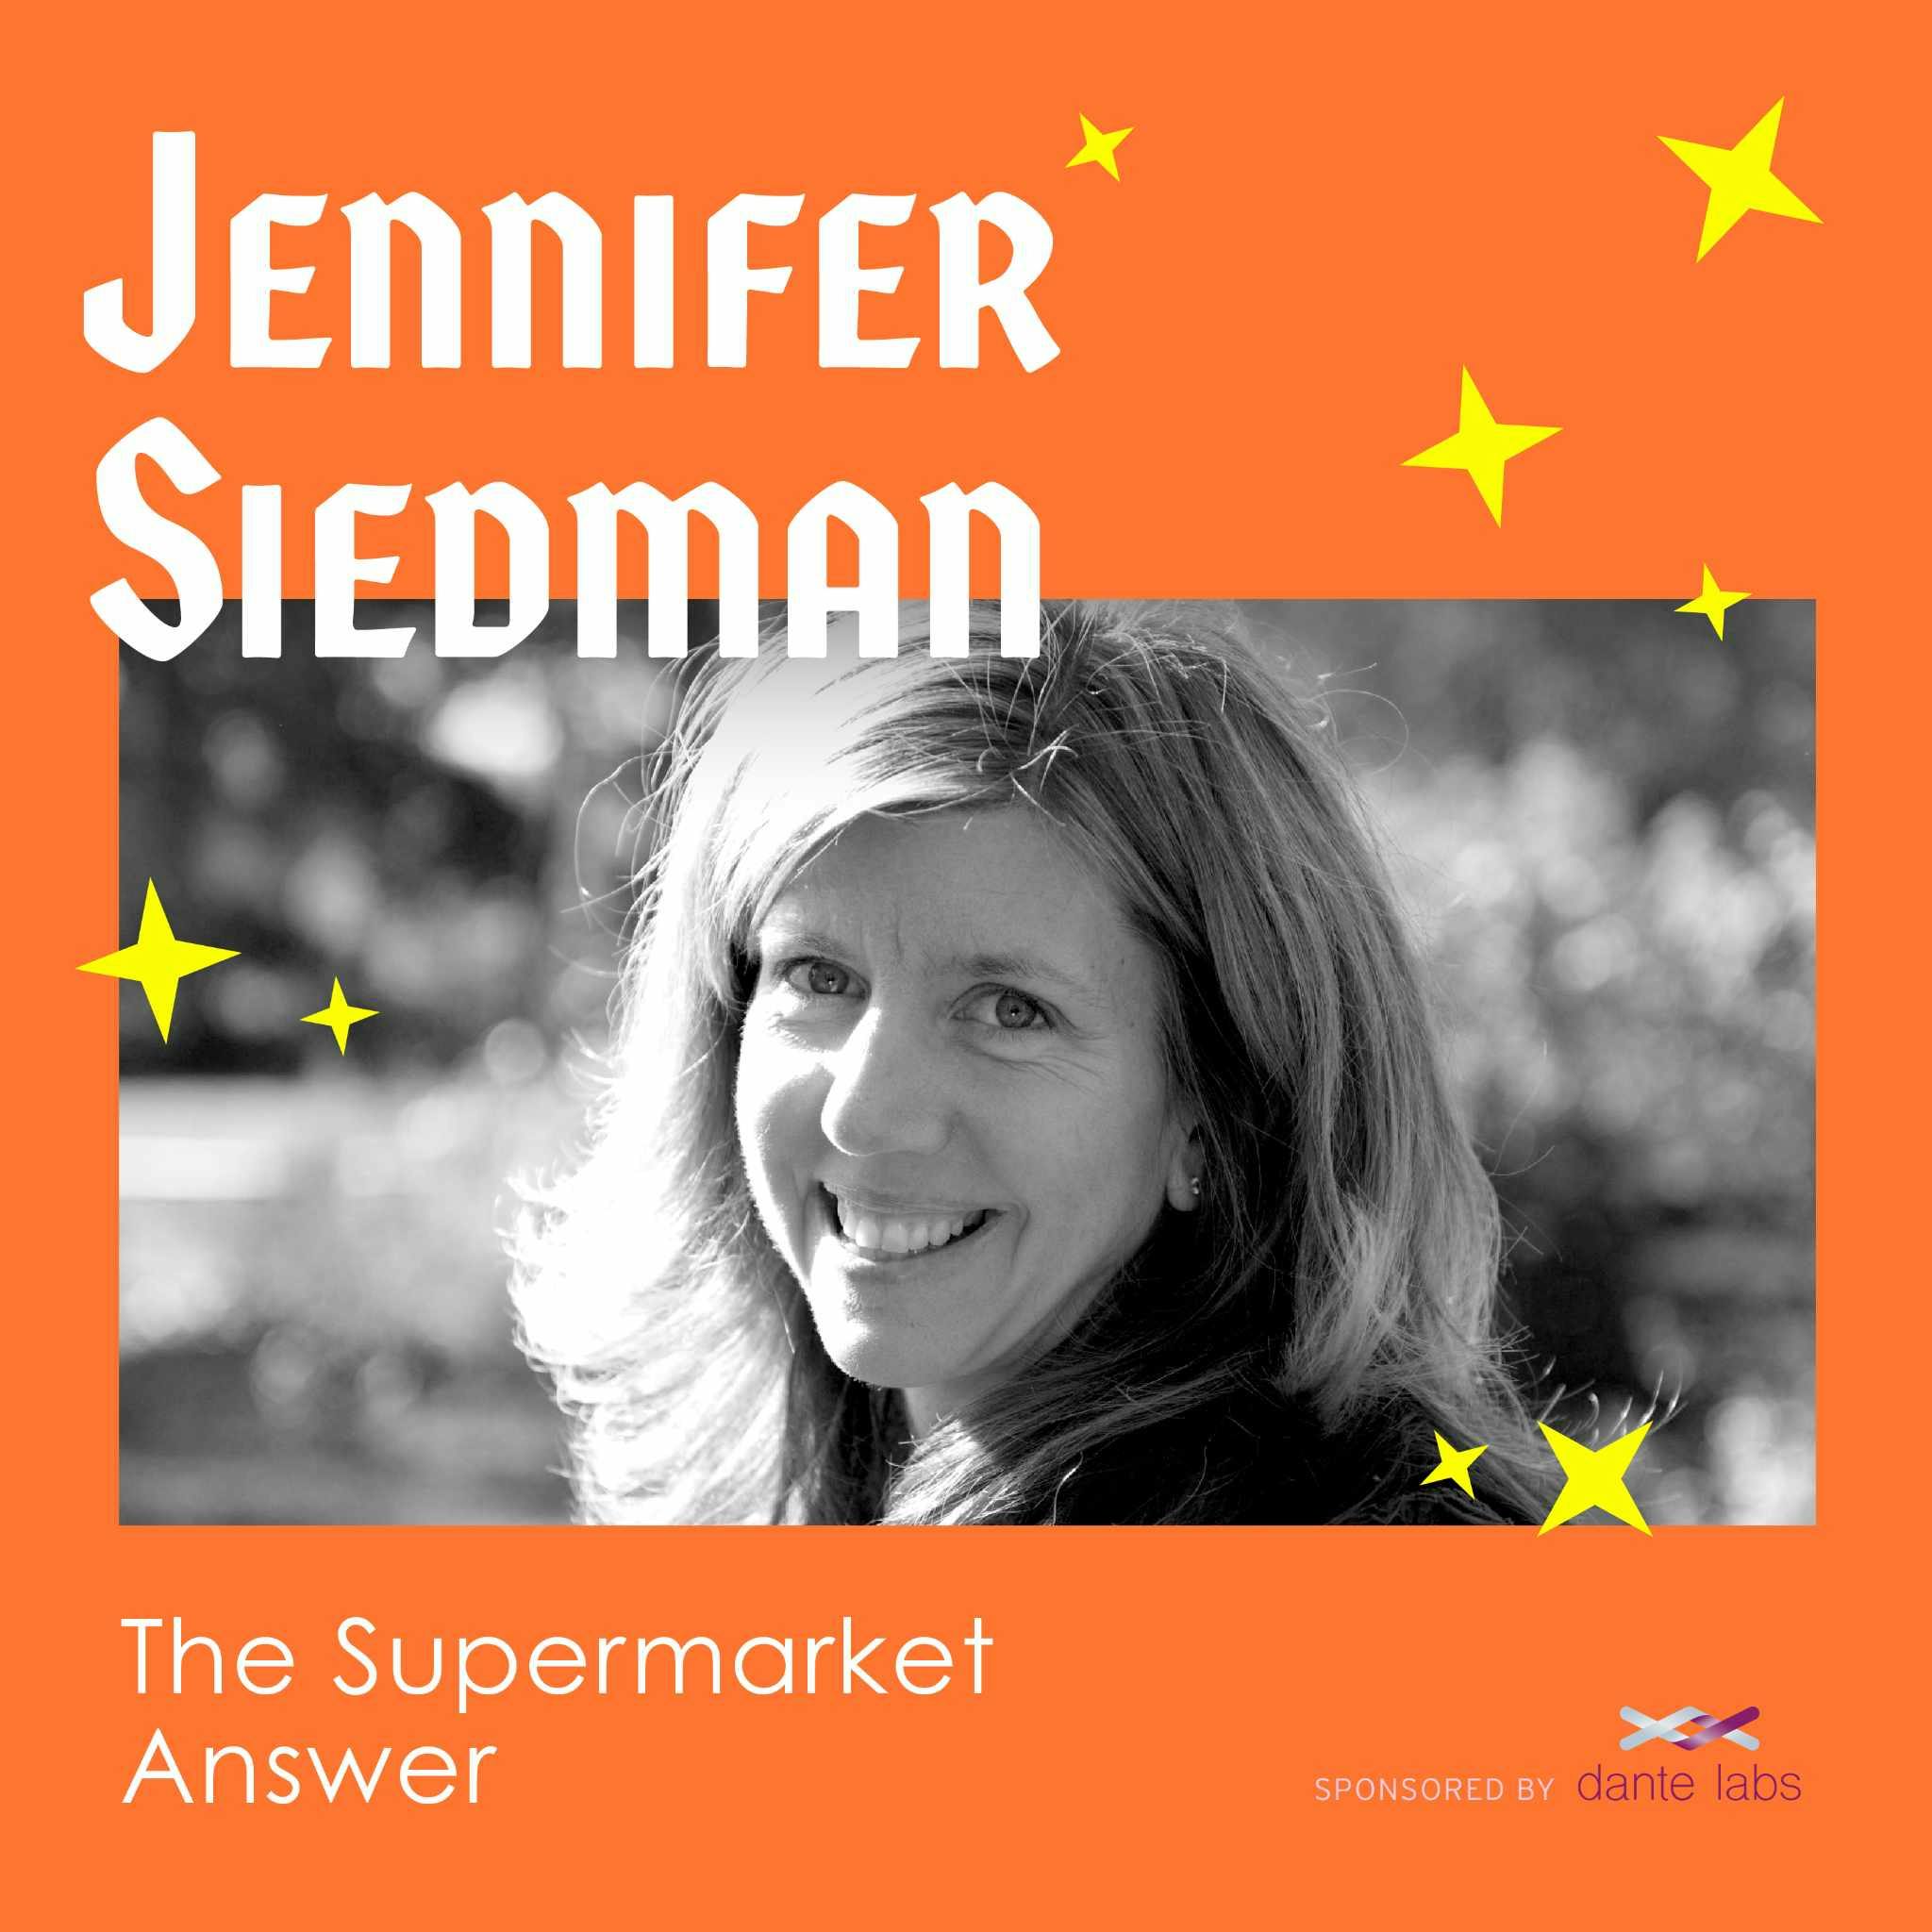 Mastering the Art of the Supermarket Answer When Someone Asks, How Are You with Jennifer Siedman